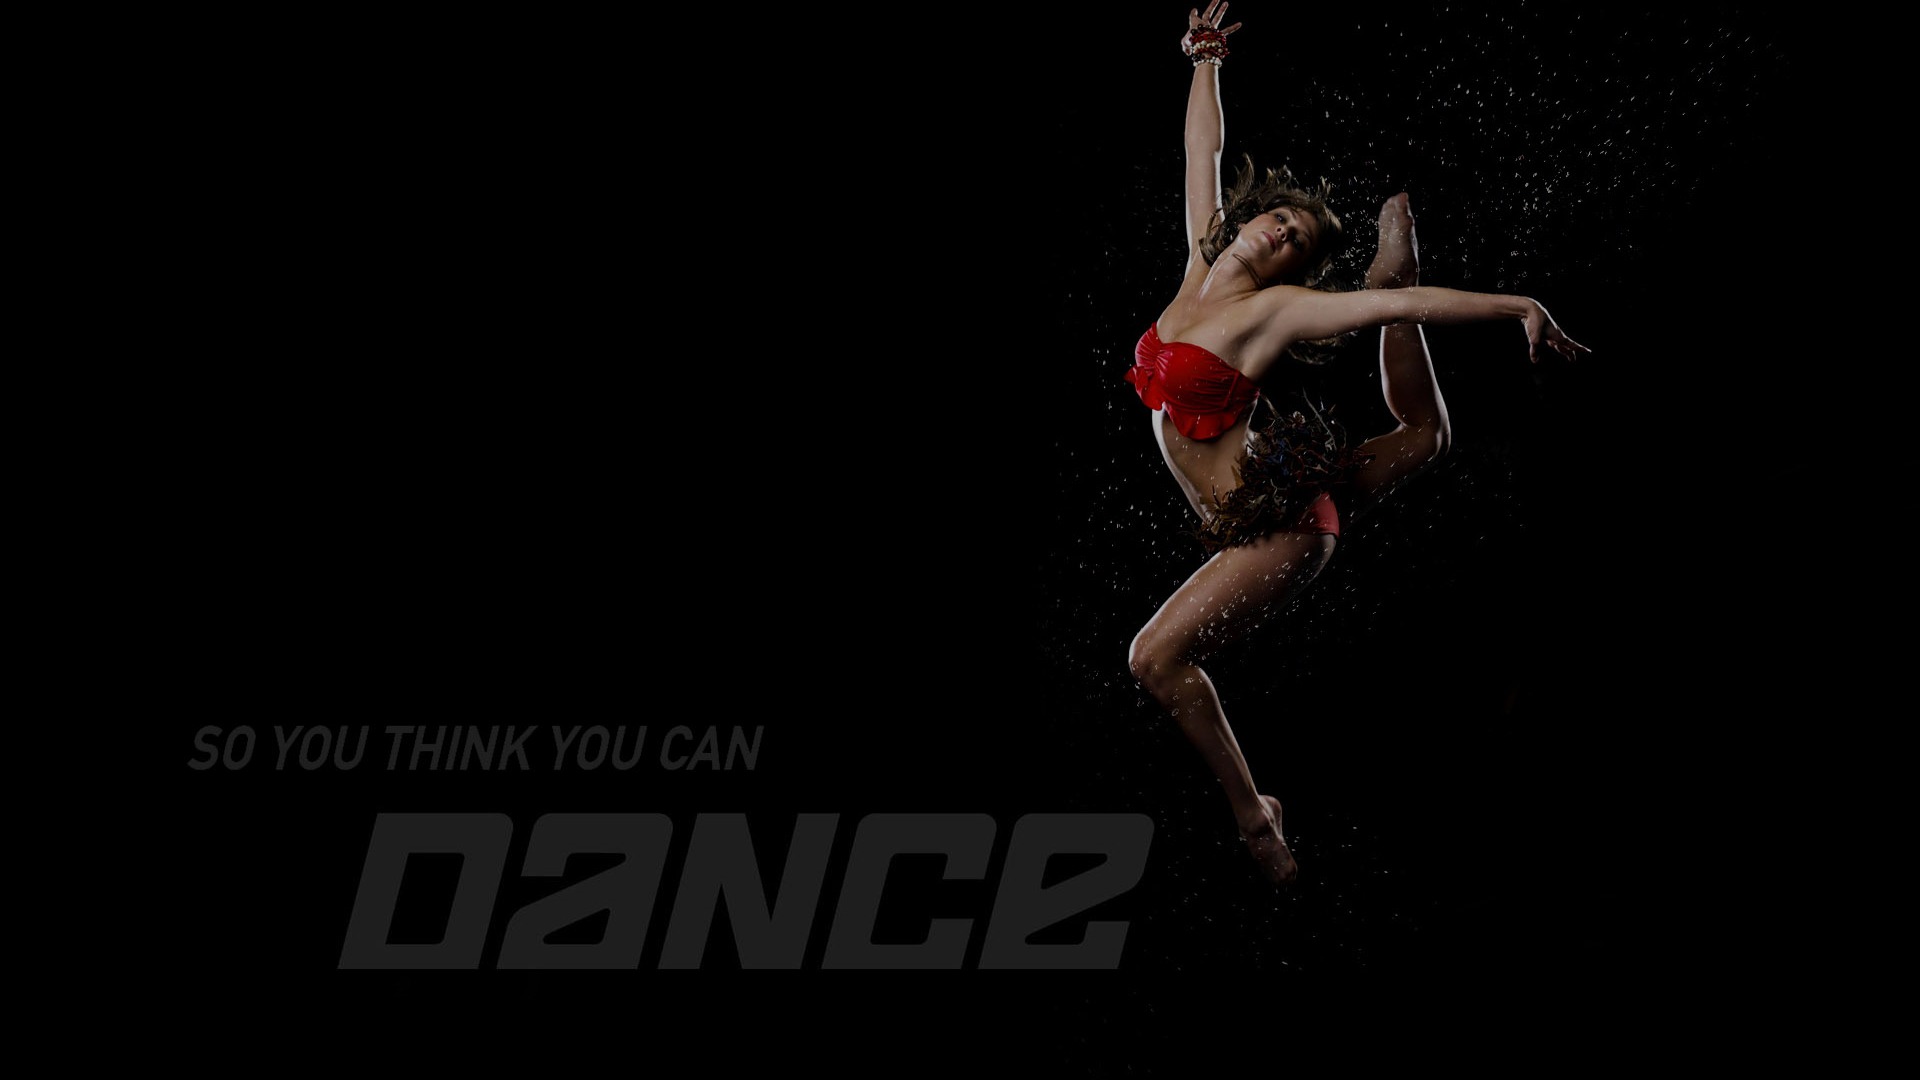 So You Think You Can Dance wallpaper (2) #13 - 1920x1080